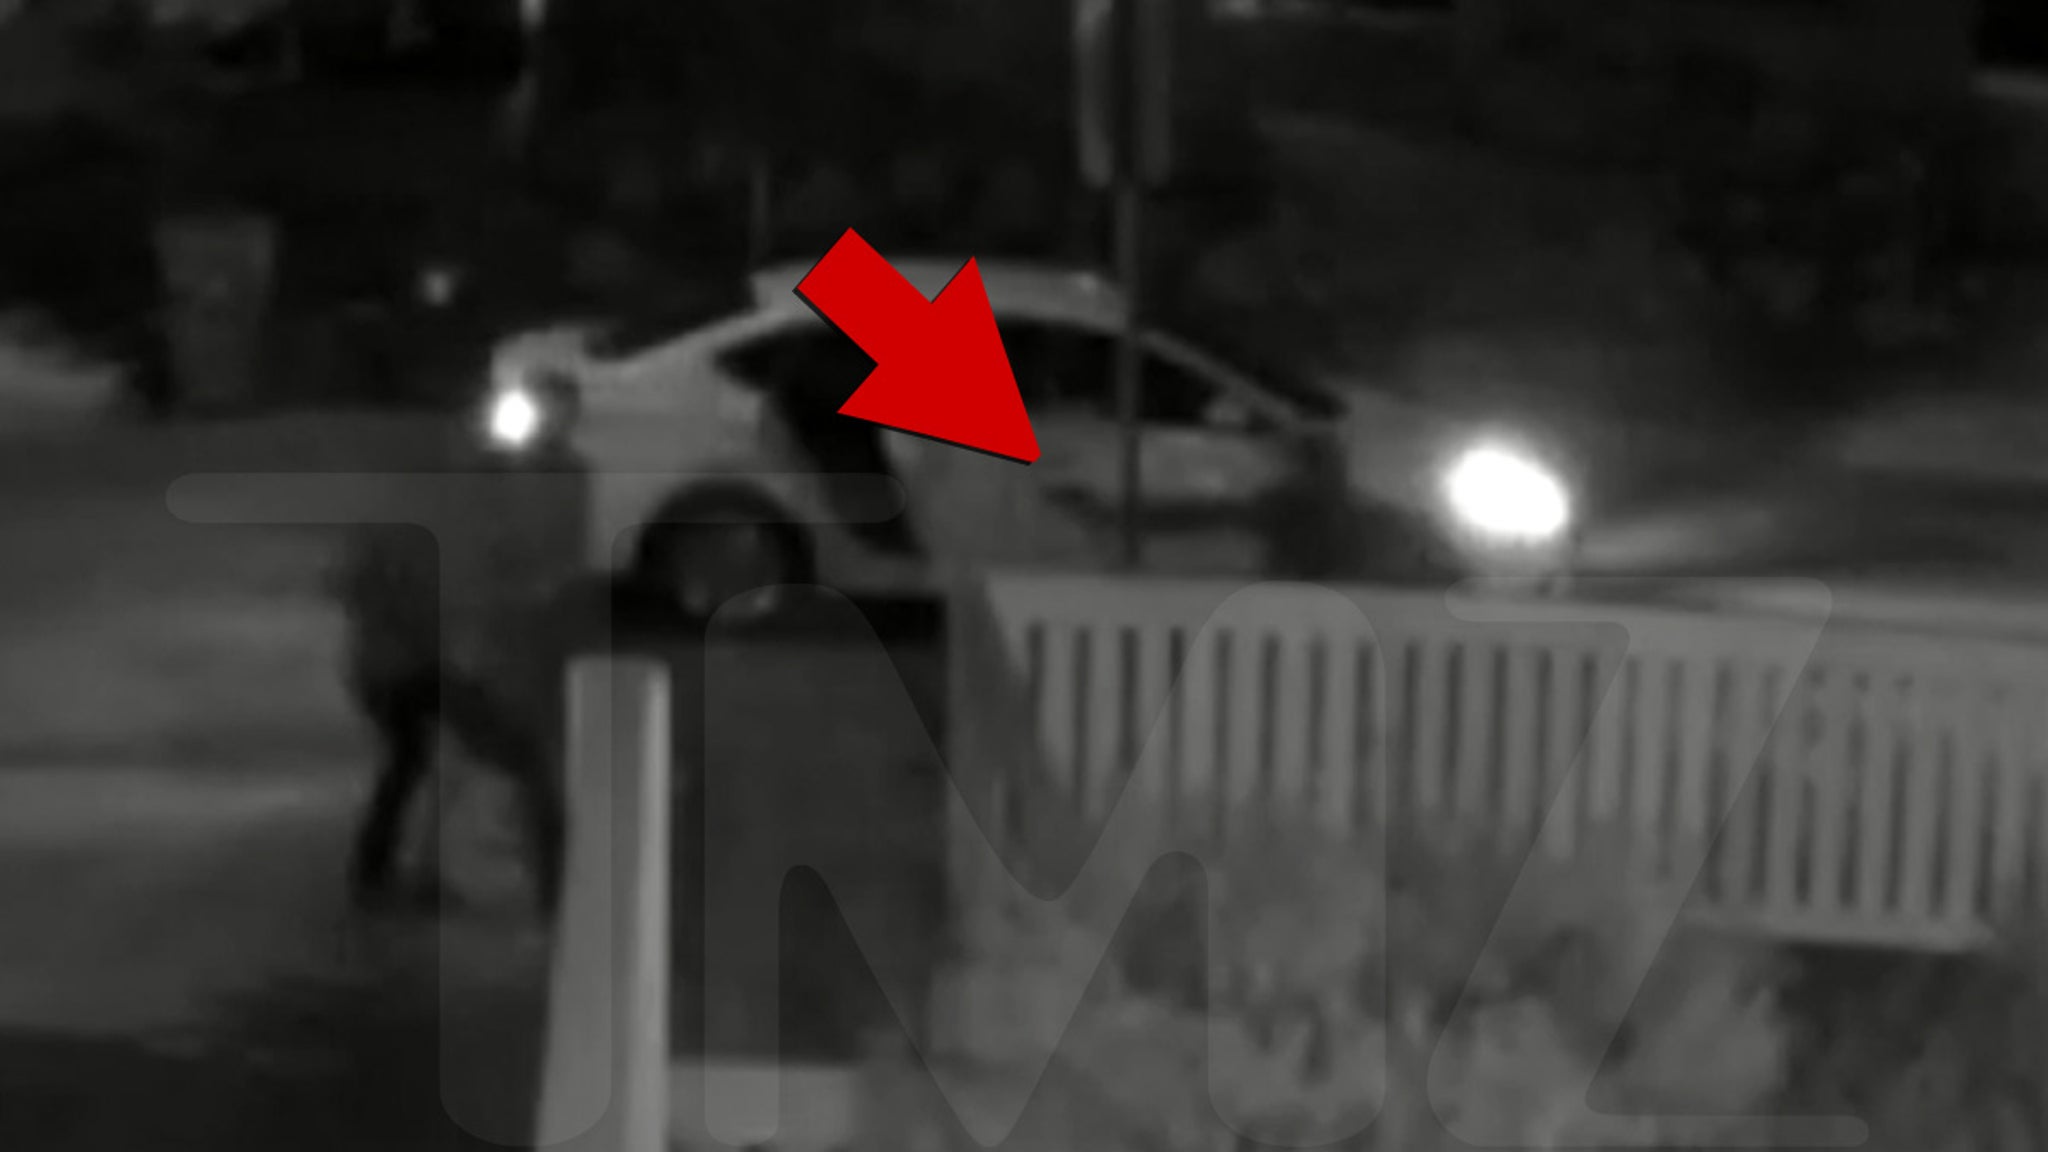 New Video of Lady Gaga Dog Abduction Shows Shooting and Getaway - TMZ